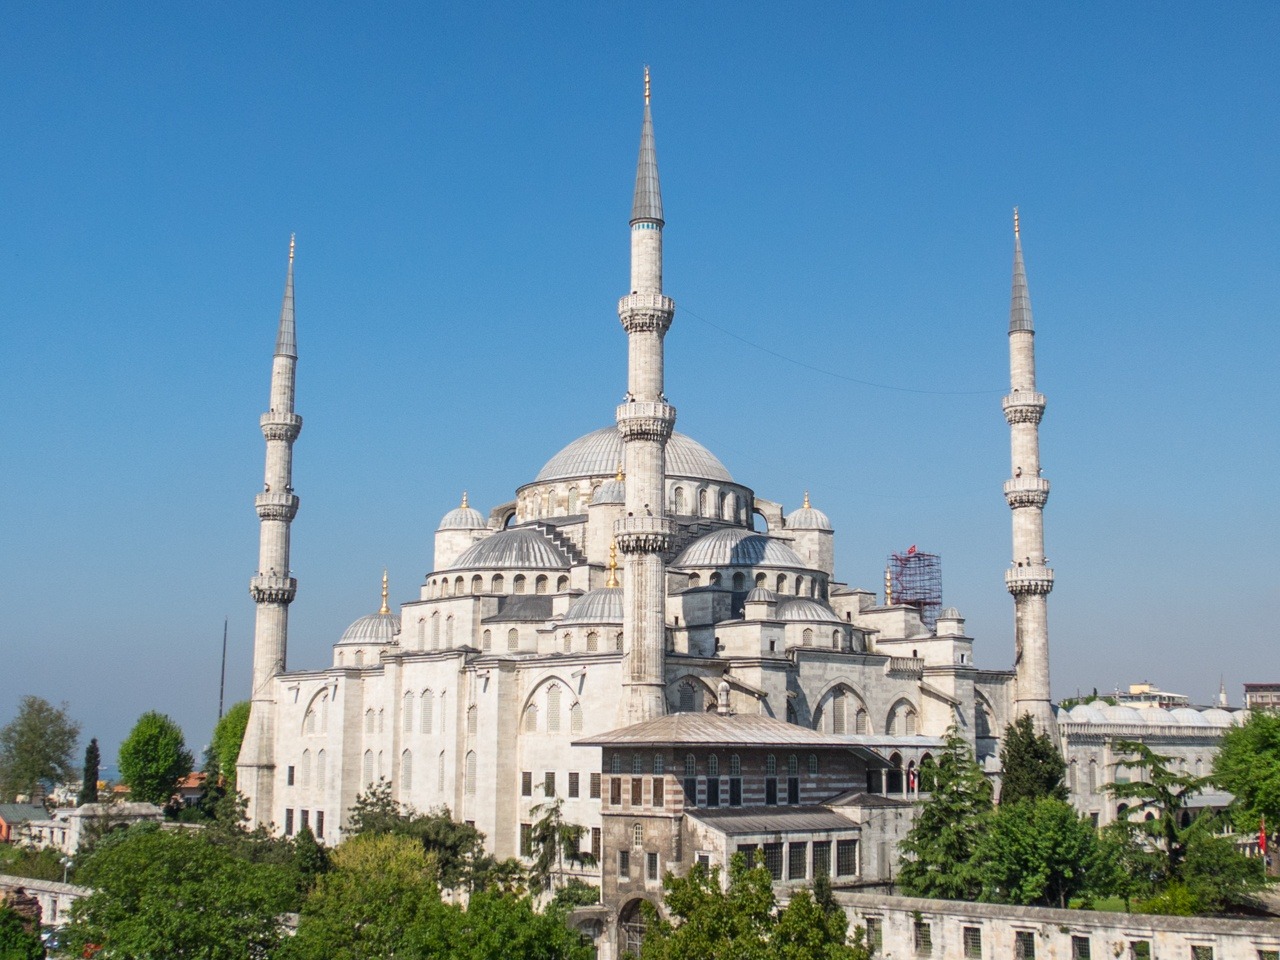 The Blue Mosque in Istanbul.